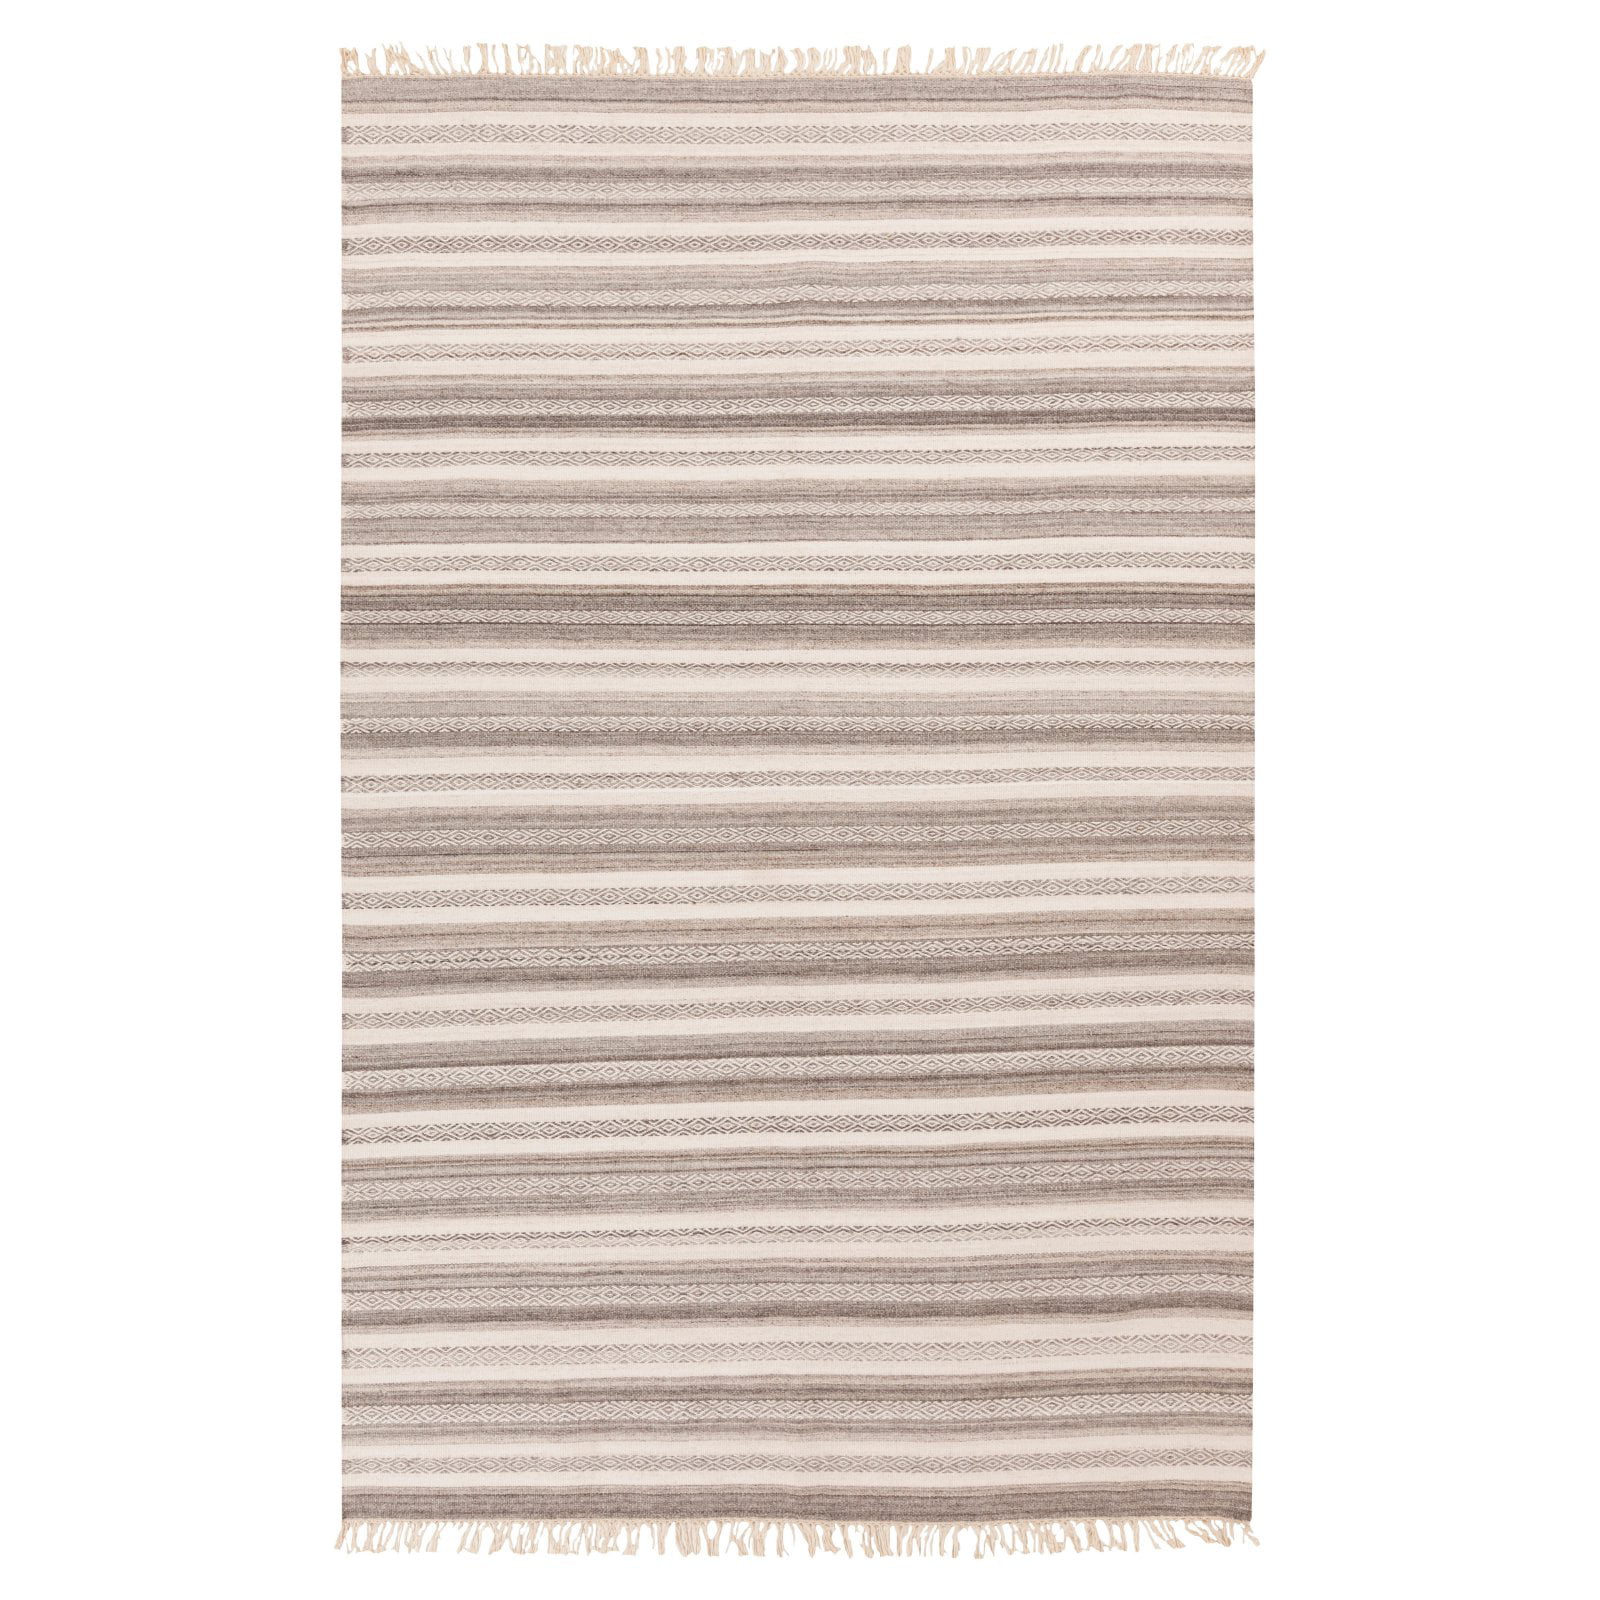 Surya PIC-4009 Hand Woven Indoor/Outdoor Accent Rug 3-Feet 3-Inch by 5-Feet 3-Inch 